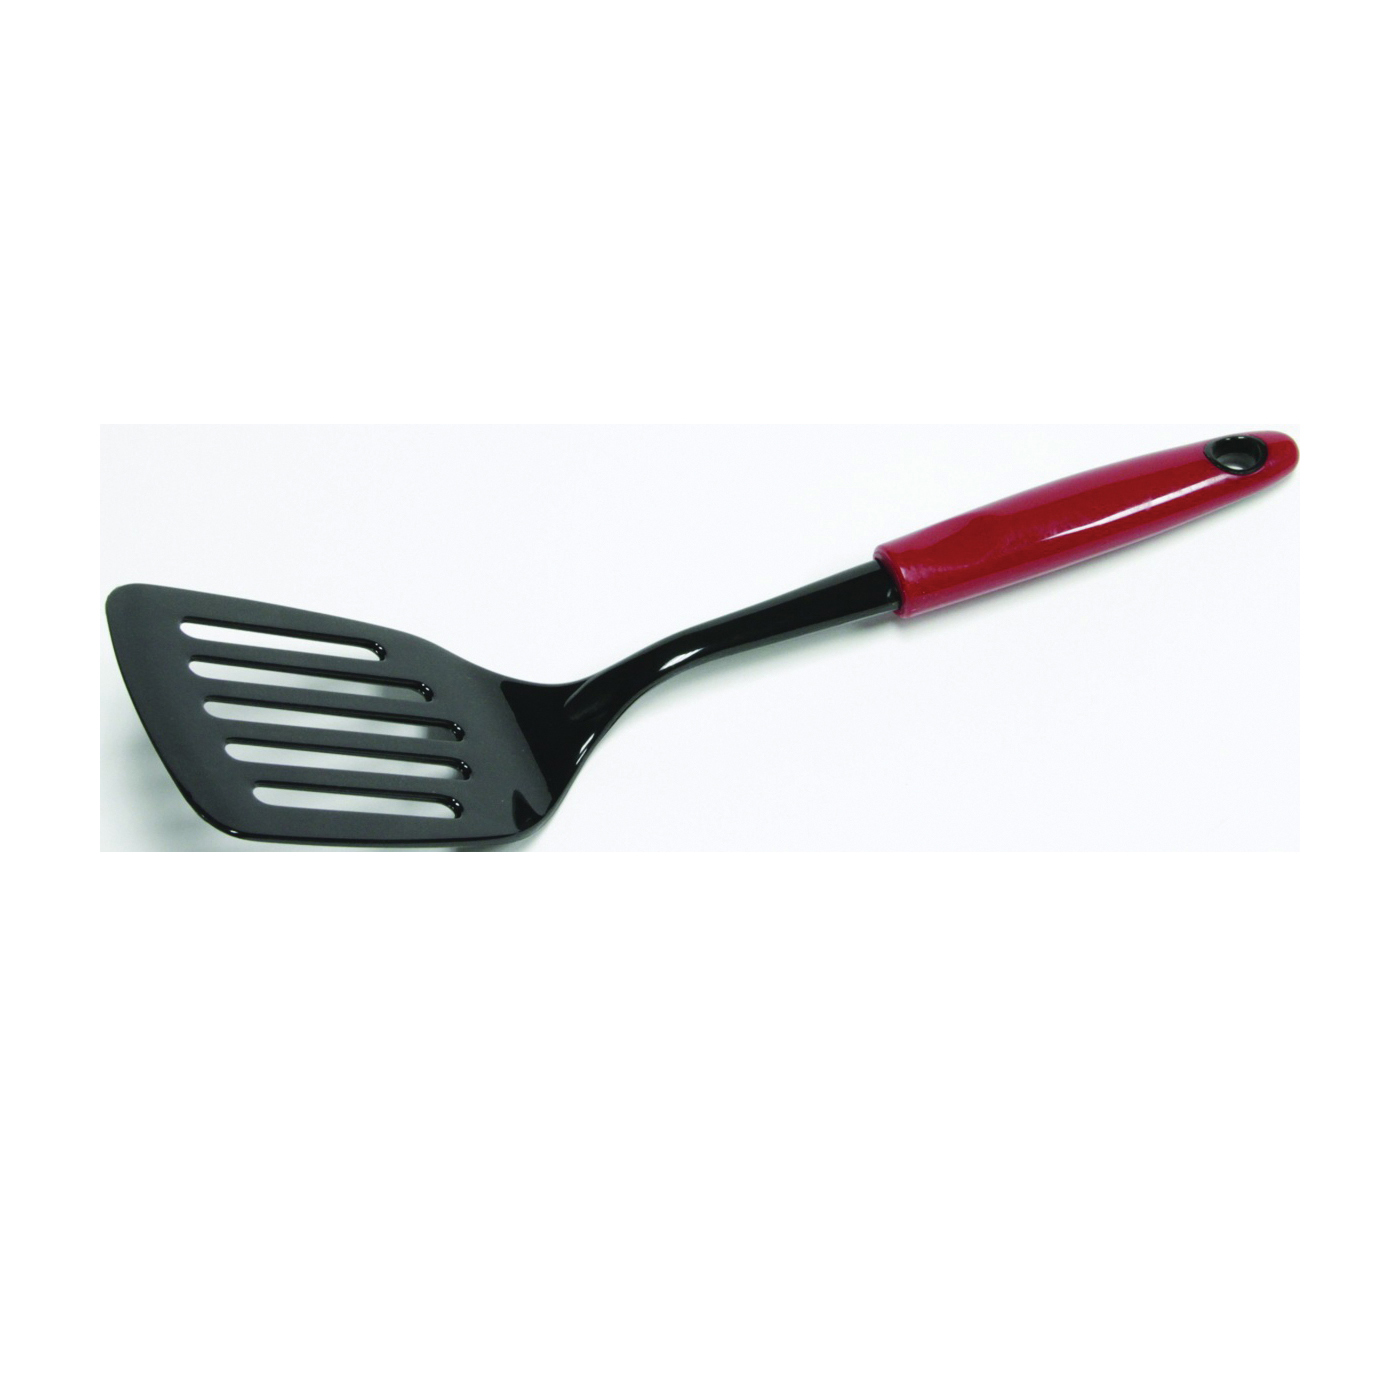 Chef Craft 12111 Slotted Turner, Red